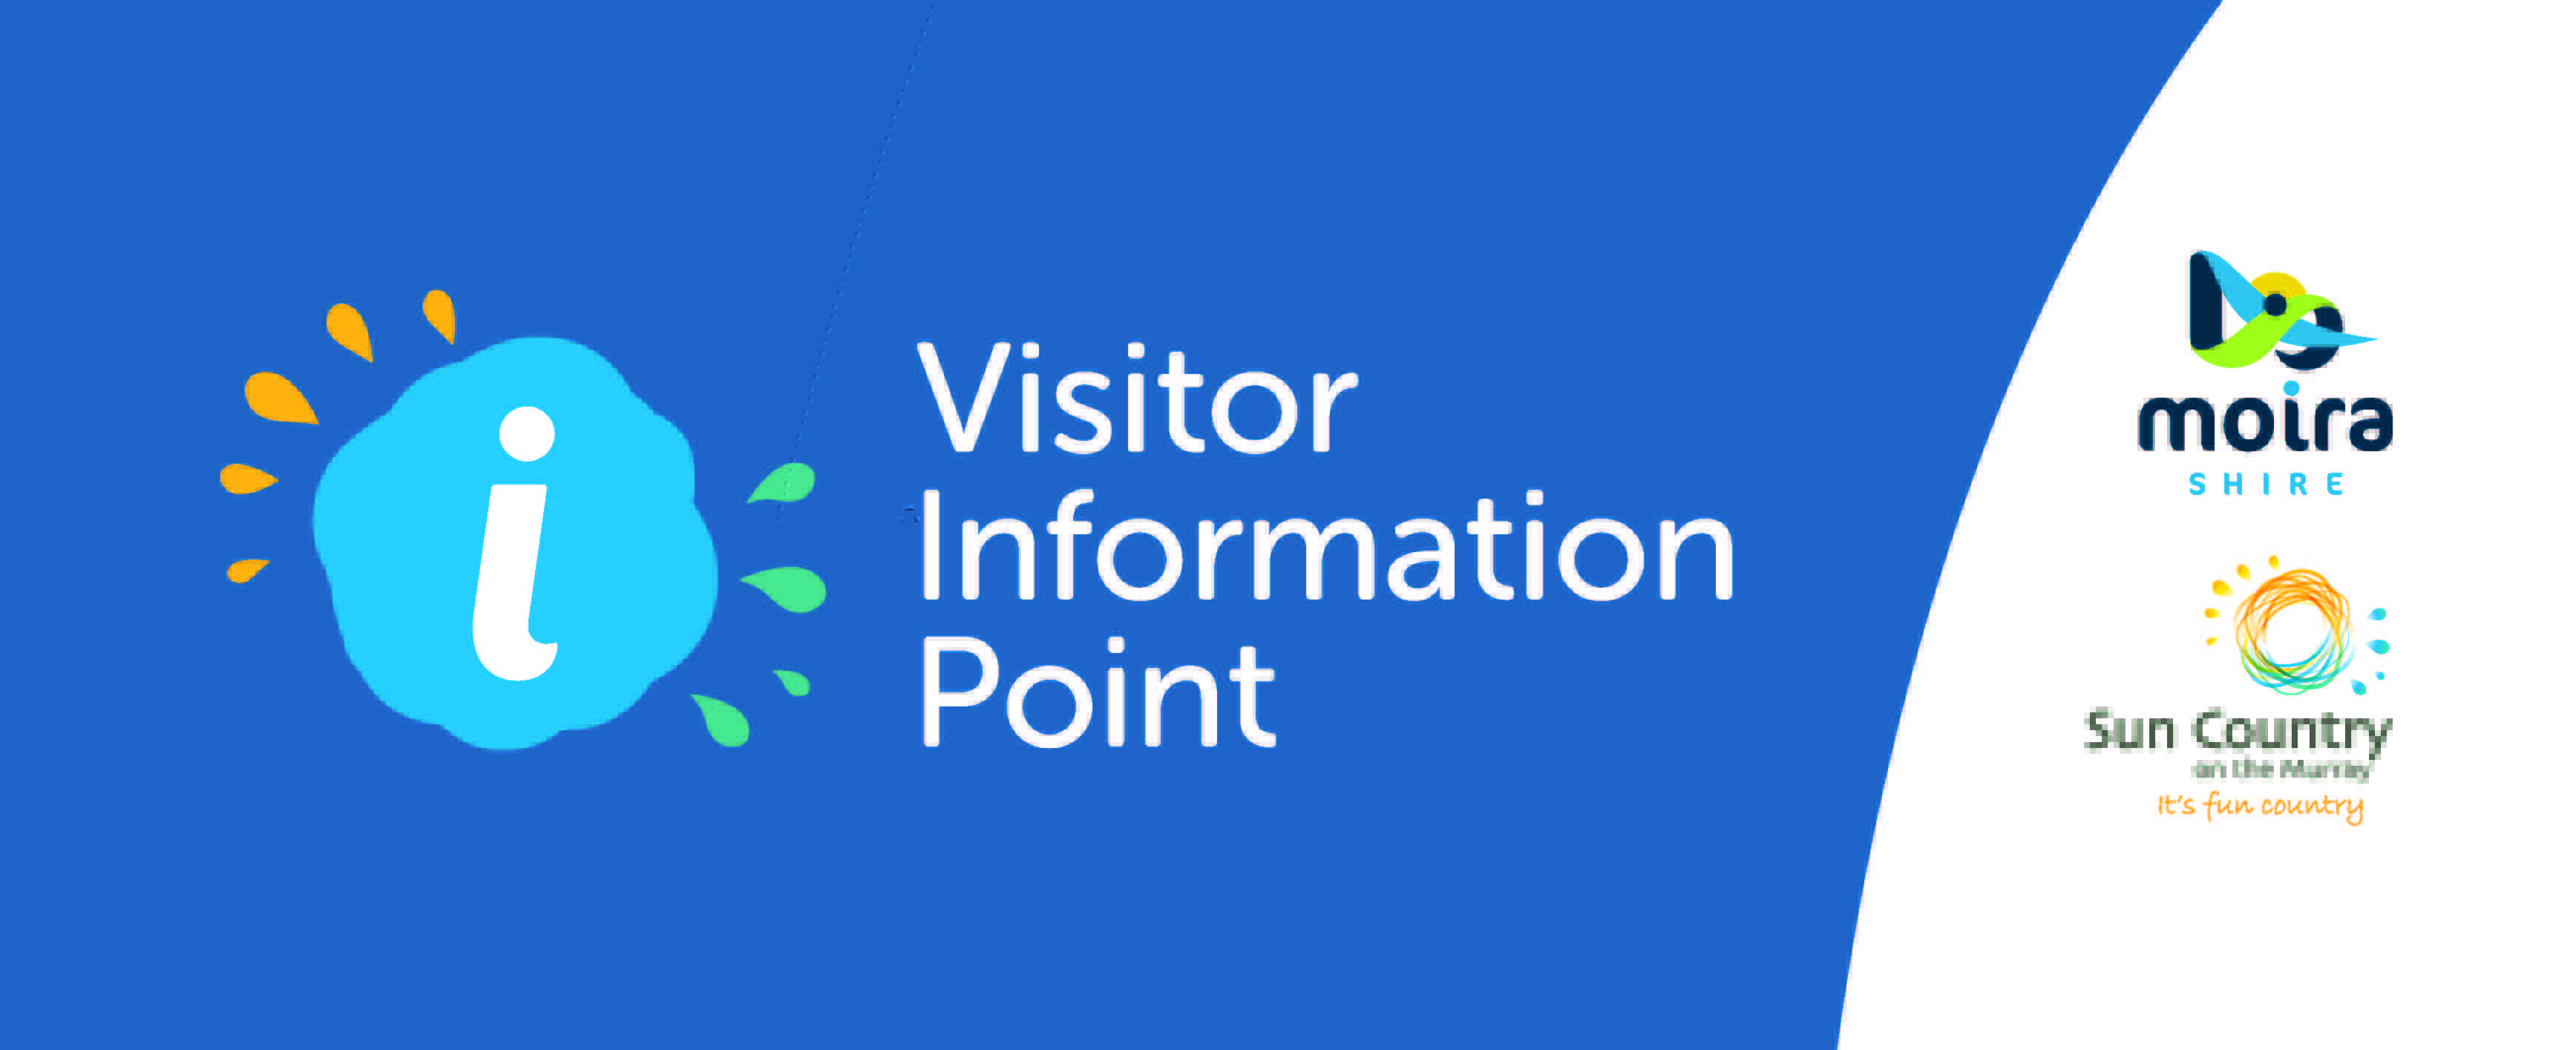 D20 60828 Visitor Information Point (VIP) - Brochure Stand - Design - Front - Print Ready File.jpg